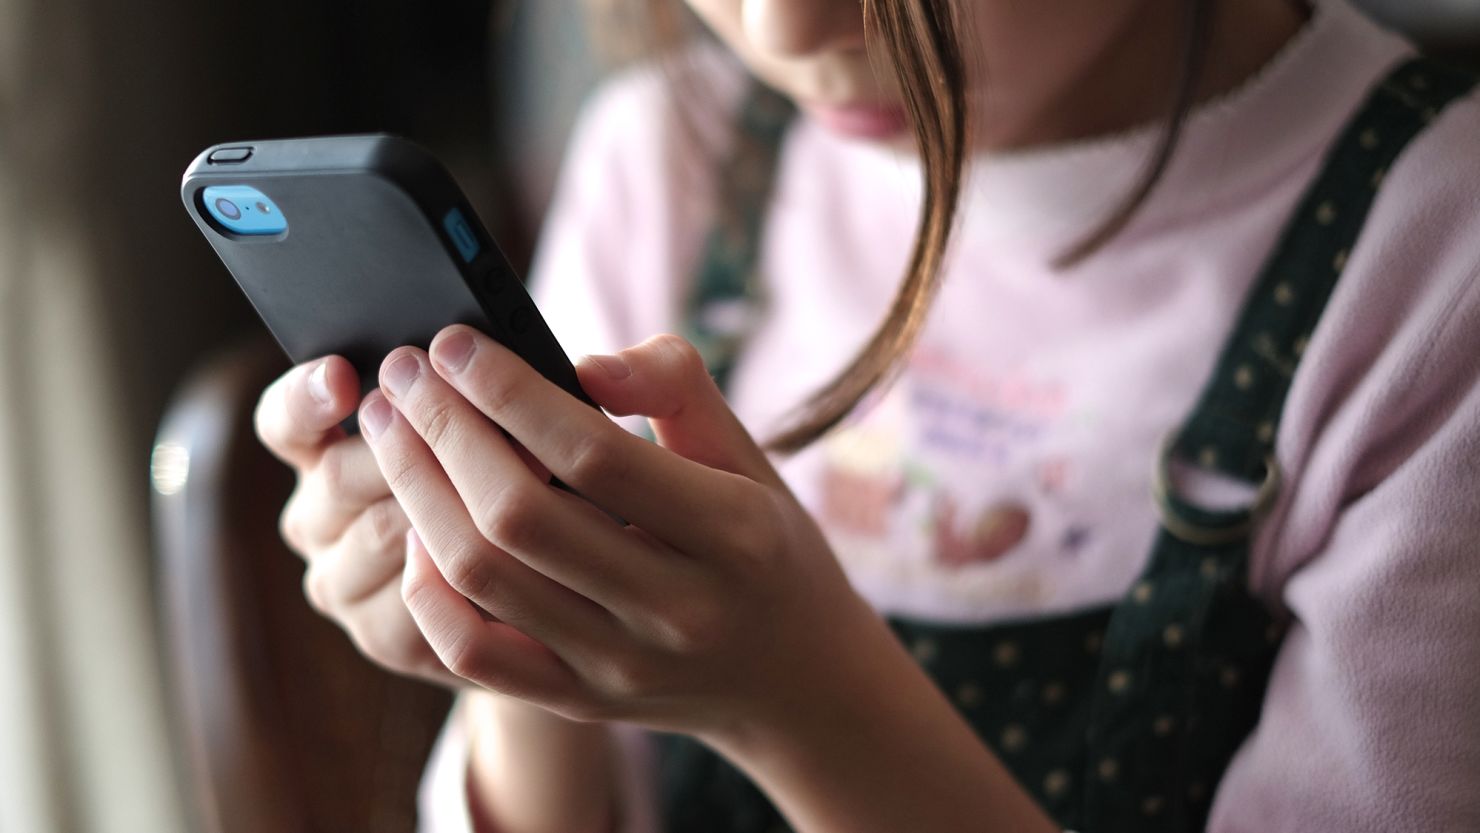 Child with a smartphone. Federal District Judge Algenon Marbley blocked Ohio legislation that would require social media platforms to obtain parental consent for children under 16 to create an account.